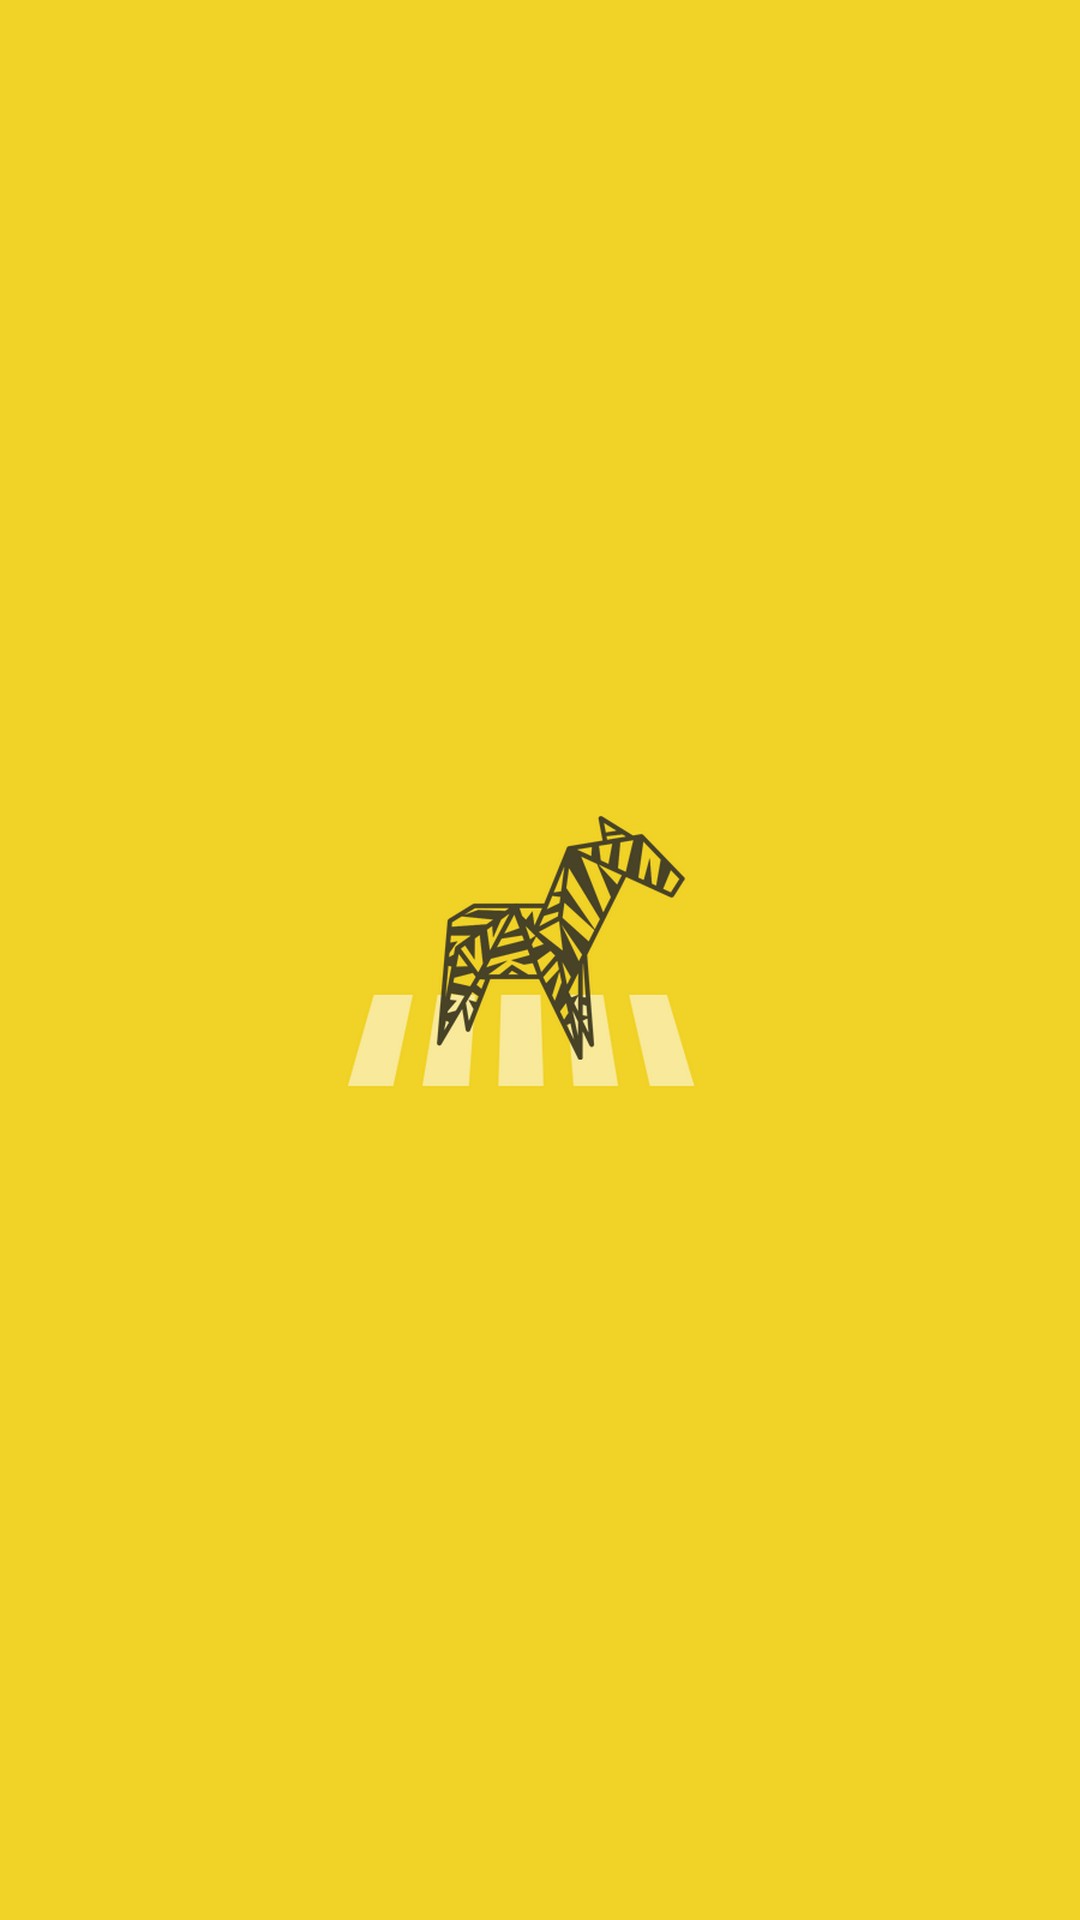 Android Wallpaper Minimalist With High-resolution Pixel - Mane - HD Wallpaper 